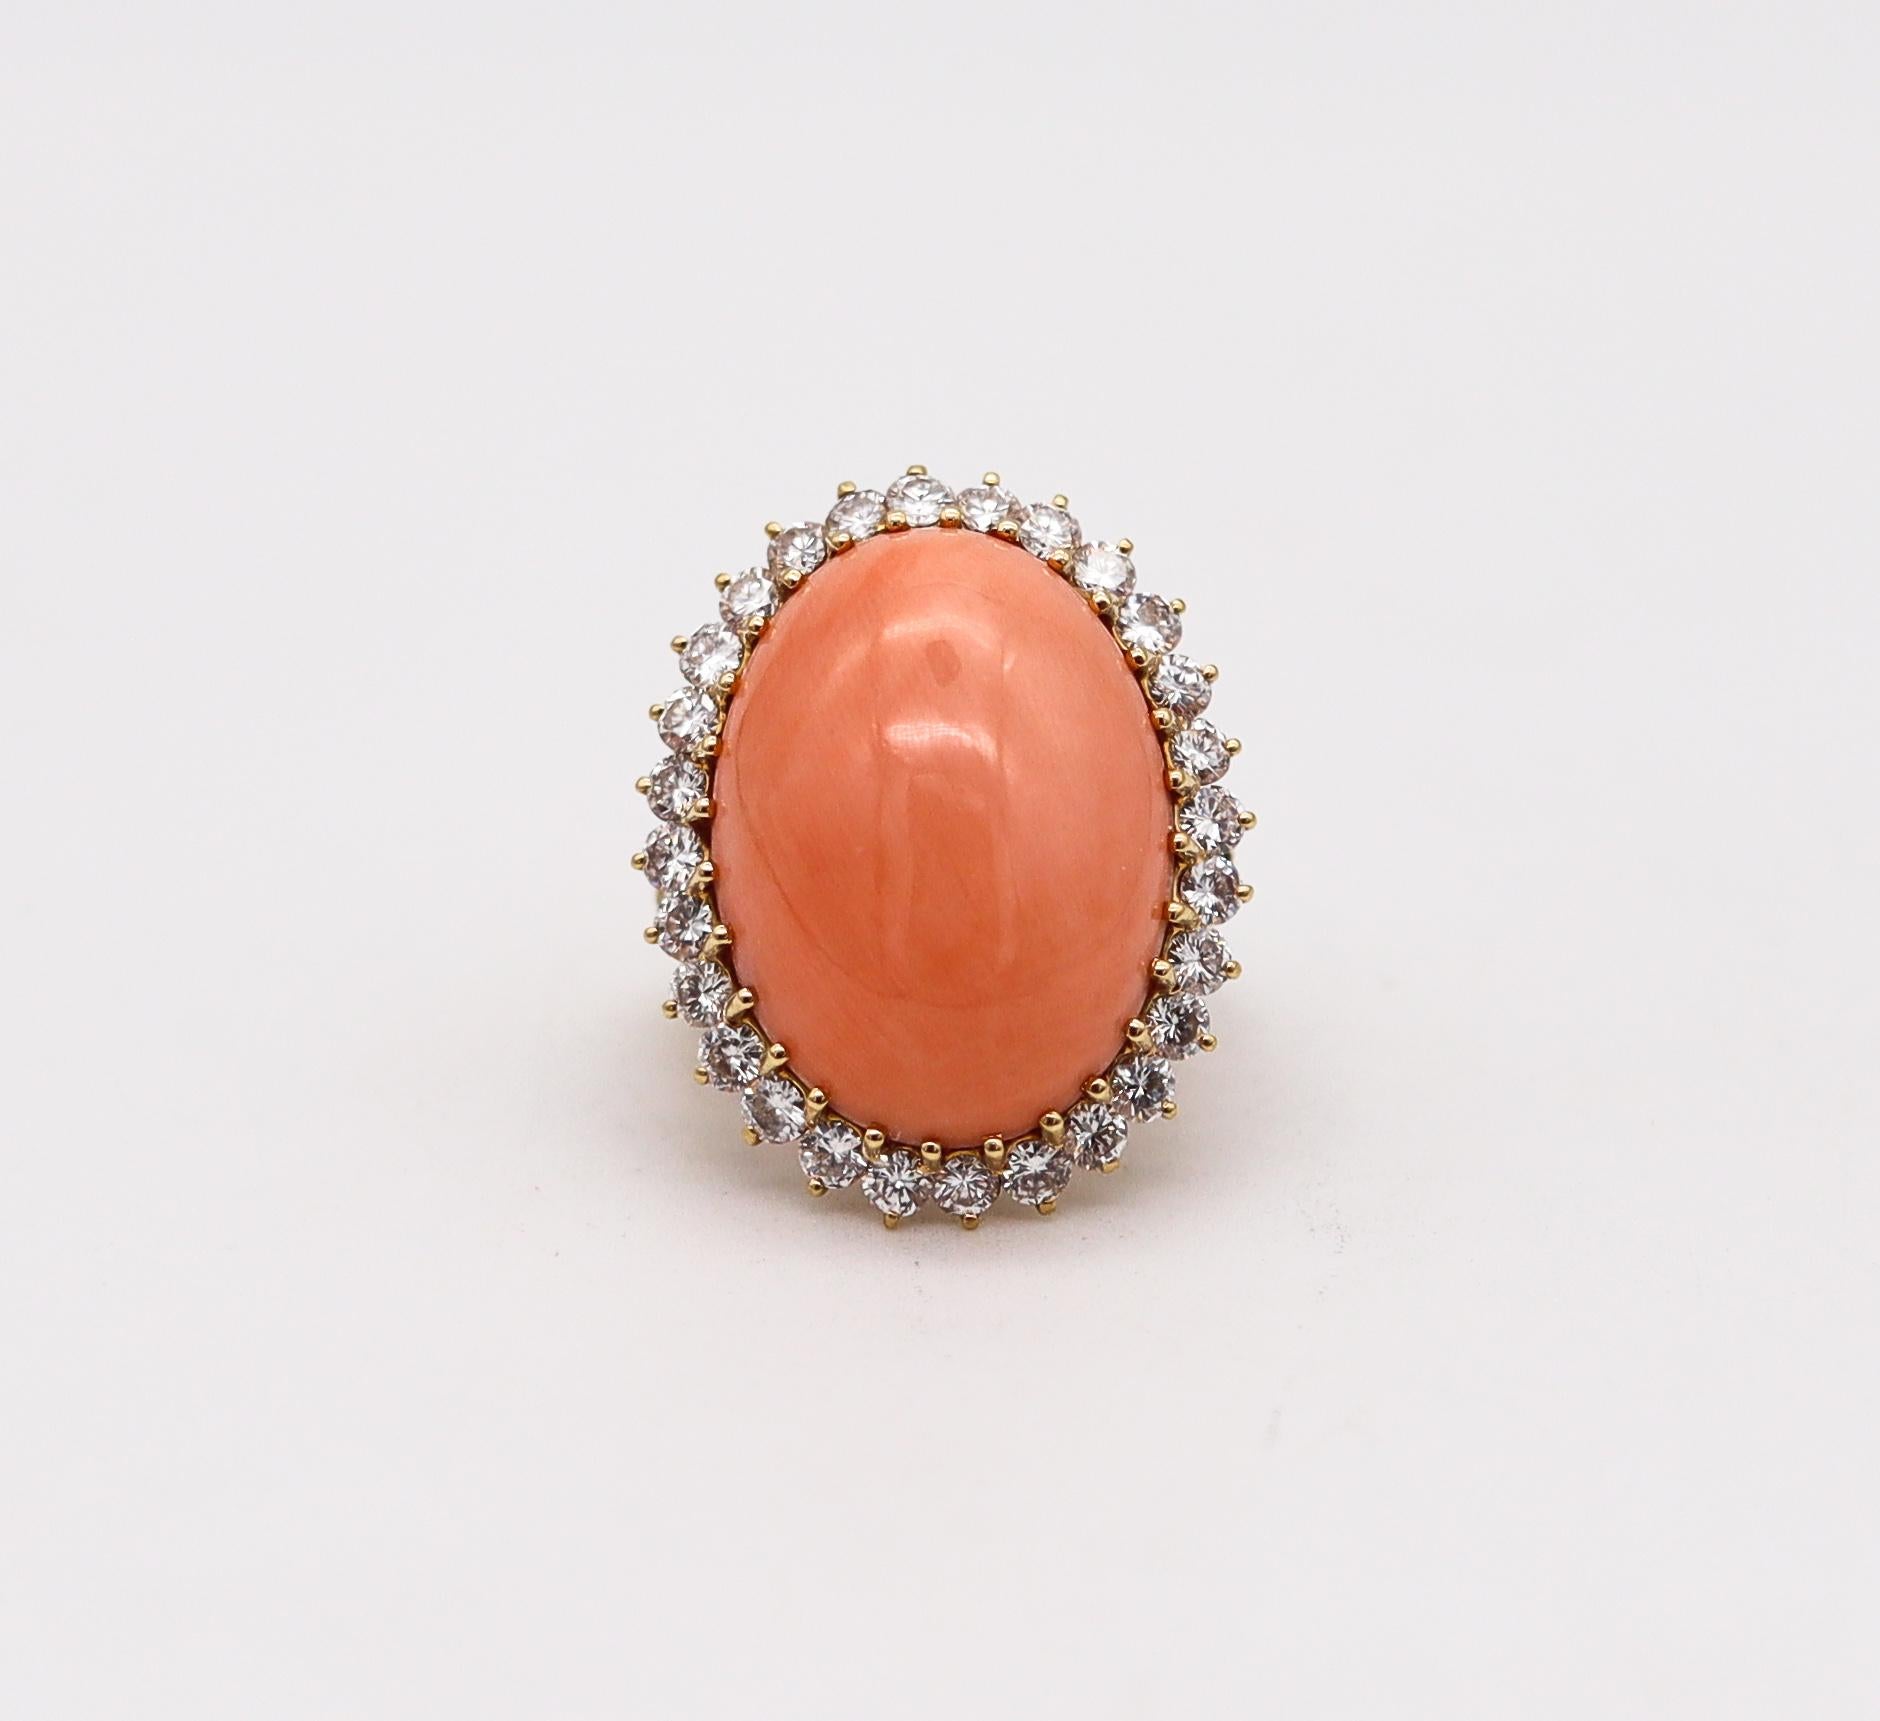 Modernist Mauboussin 1970 Paris Coral Cocktail Ring 18Kt Gold 28.66 Ctw Diamonds And Coral For Sale